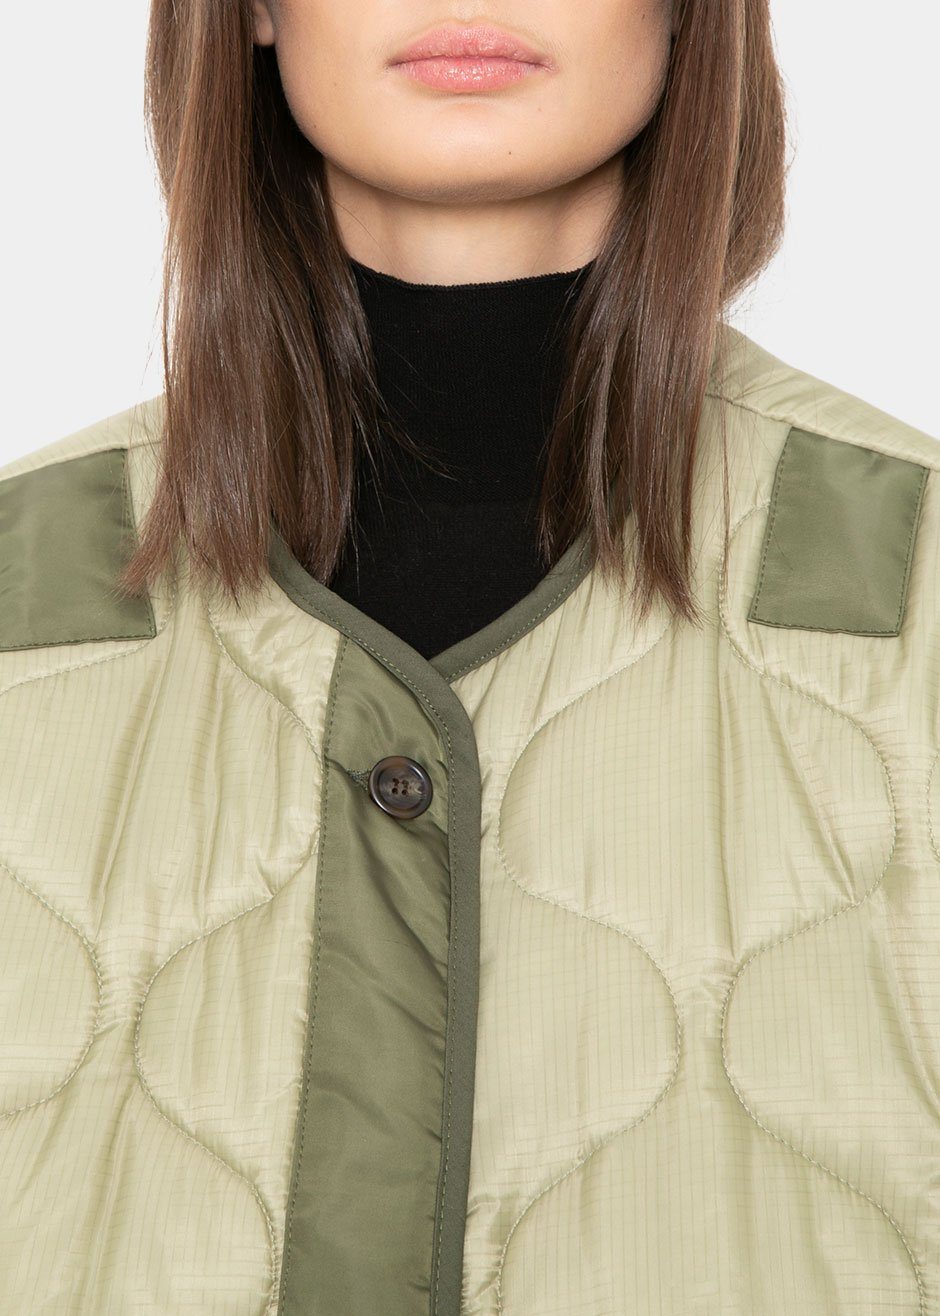 I Found The Frankie Shop Quilted Jacket Dupe — WOAHSTYLE